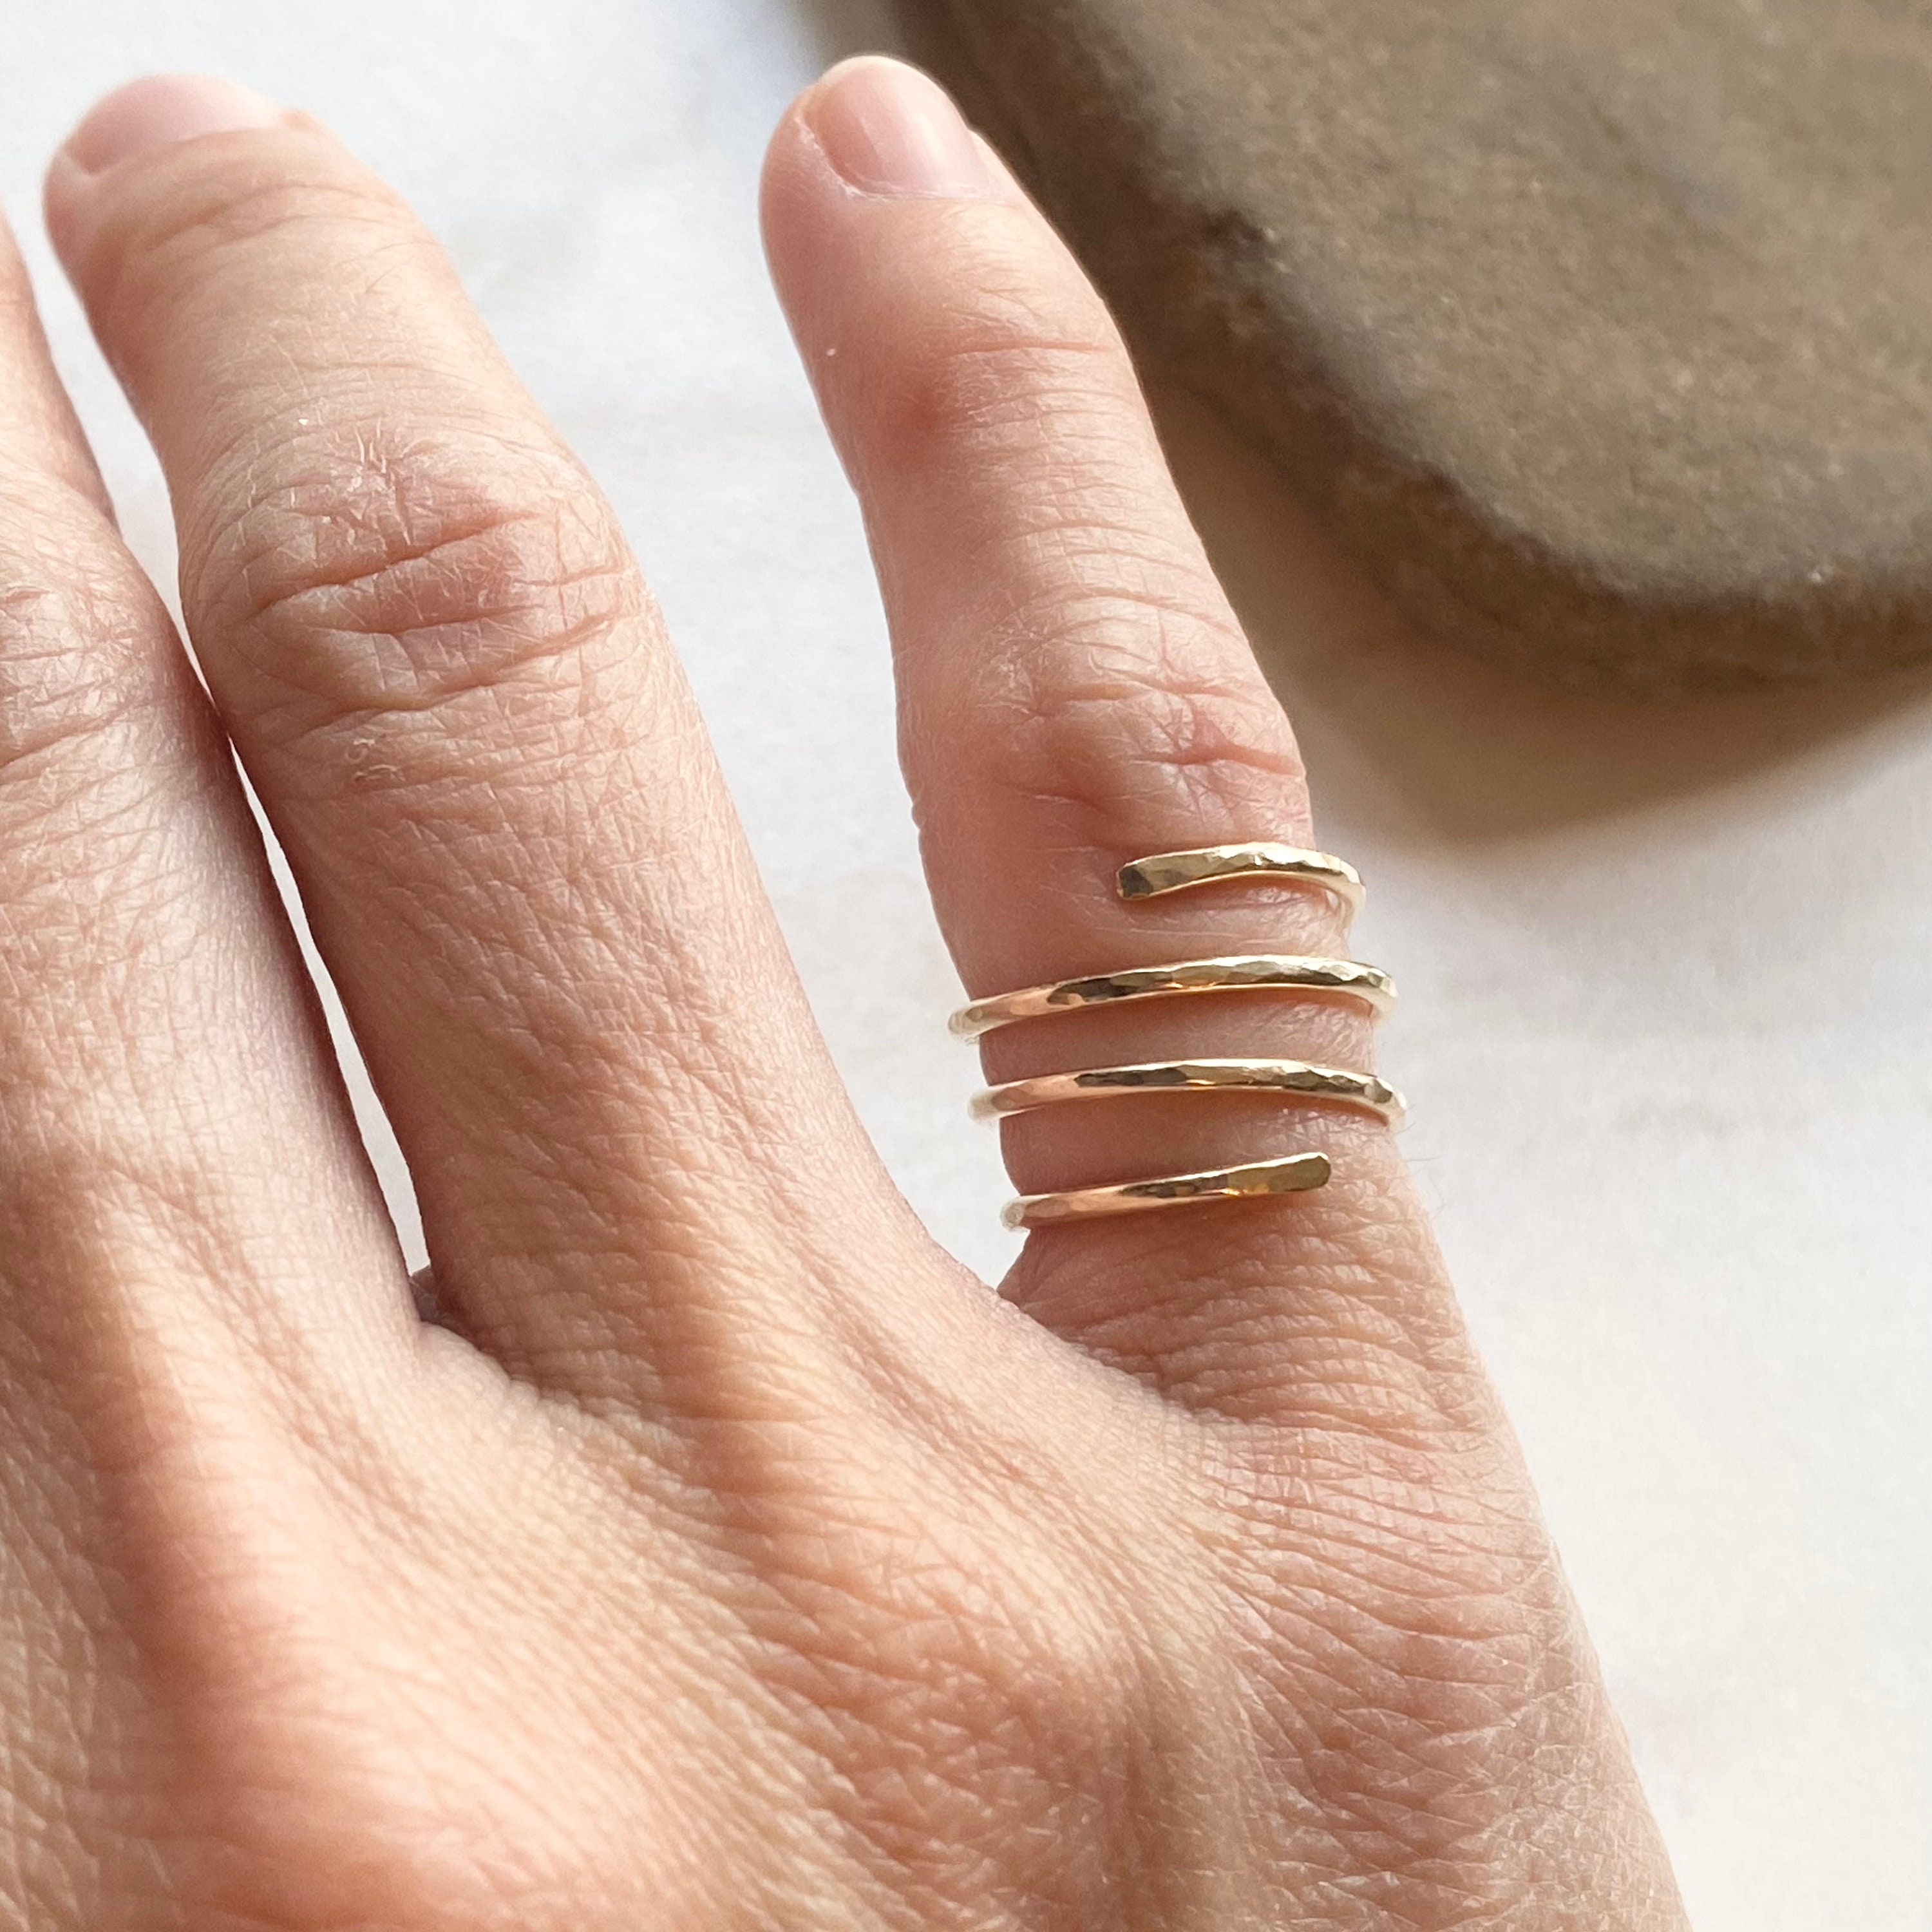 Beautifully Designed Anxiety Jewellery – Tranquillity Rings